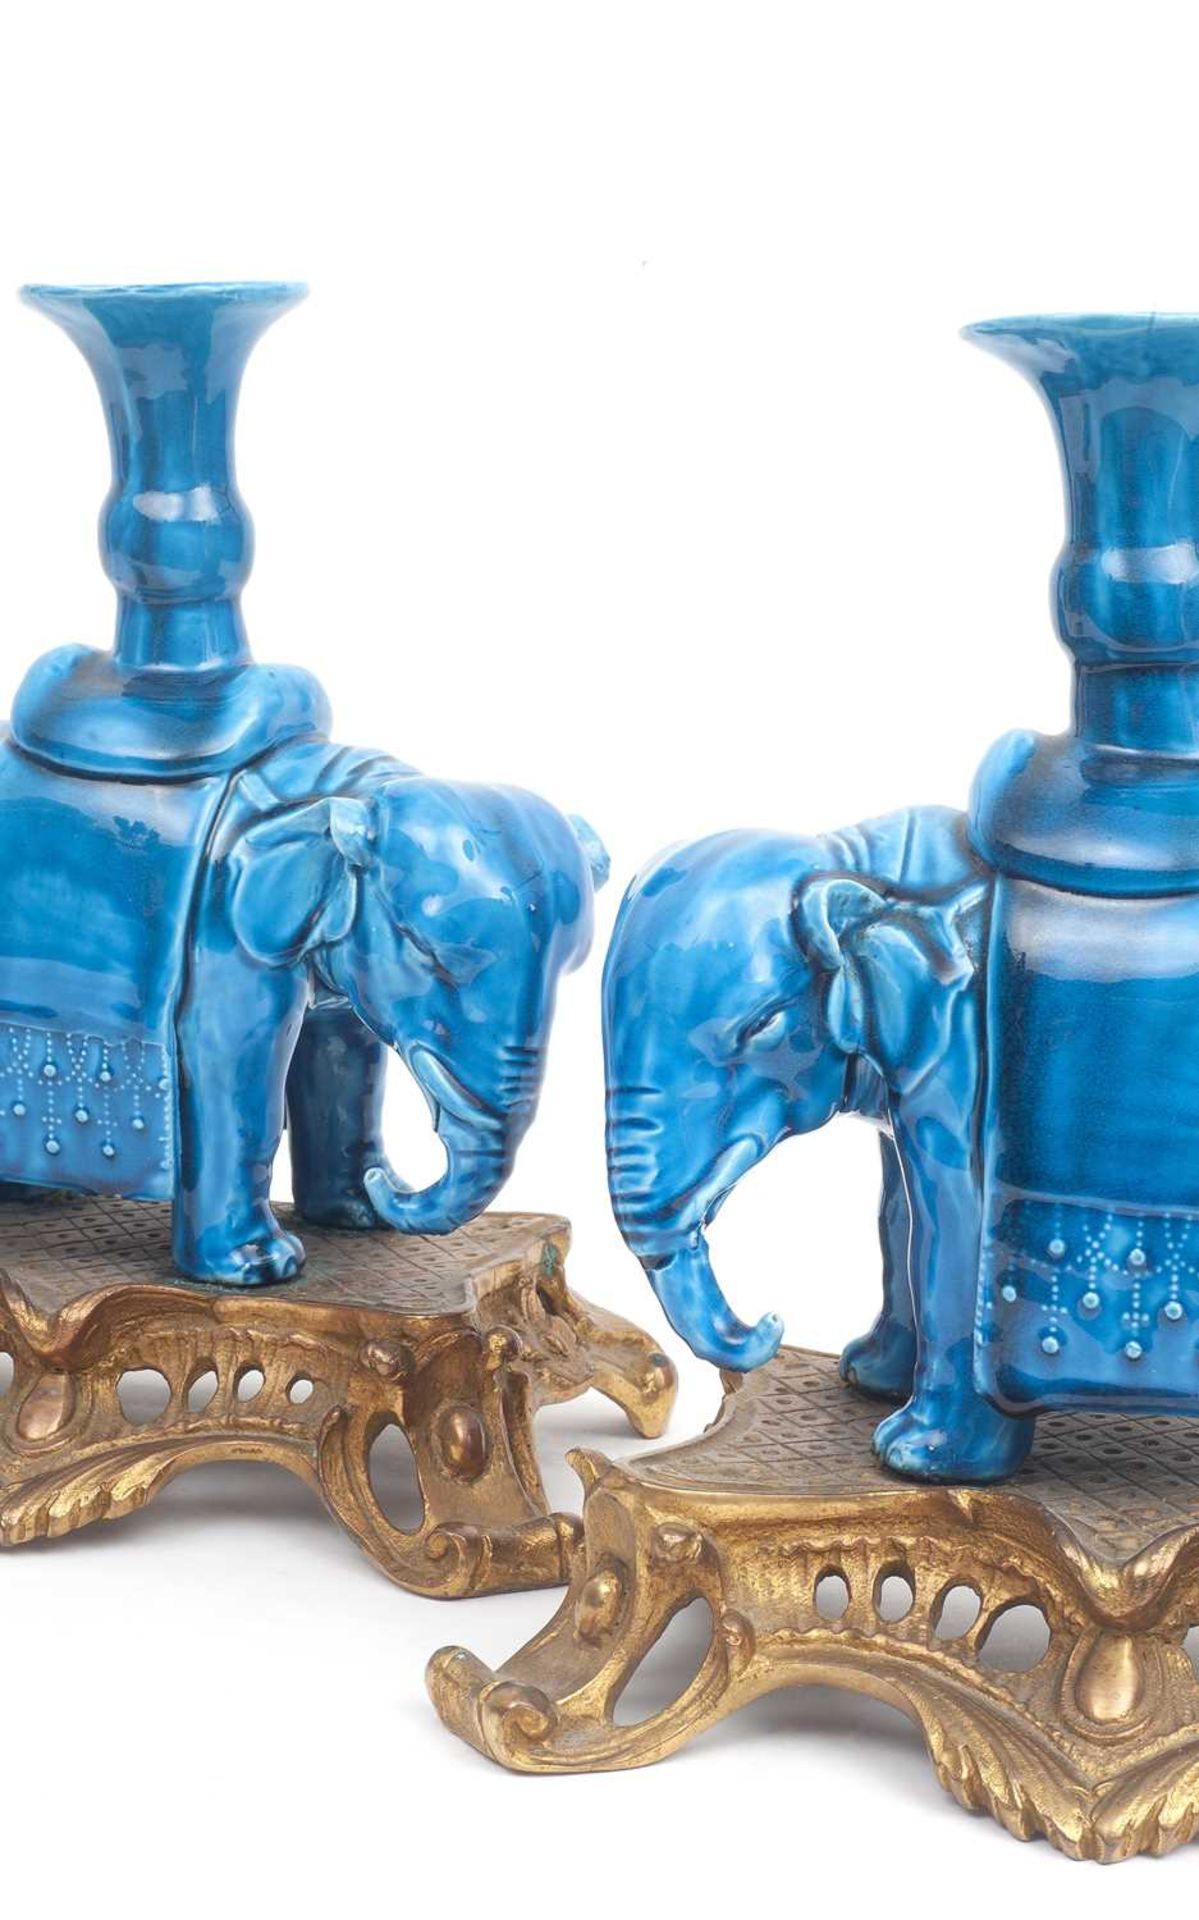 A PAIR OF 19TH CENTURY CHINESE QING DYNASTY TURQUOISE GLAZED ELEPHANT CANDLESTICKS - Image 2 of 3